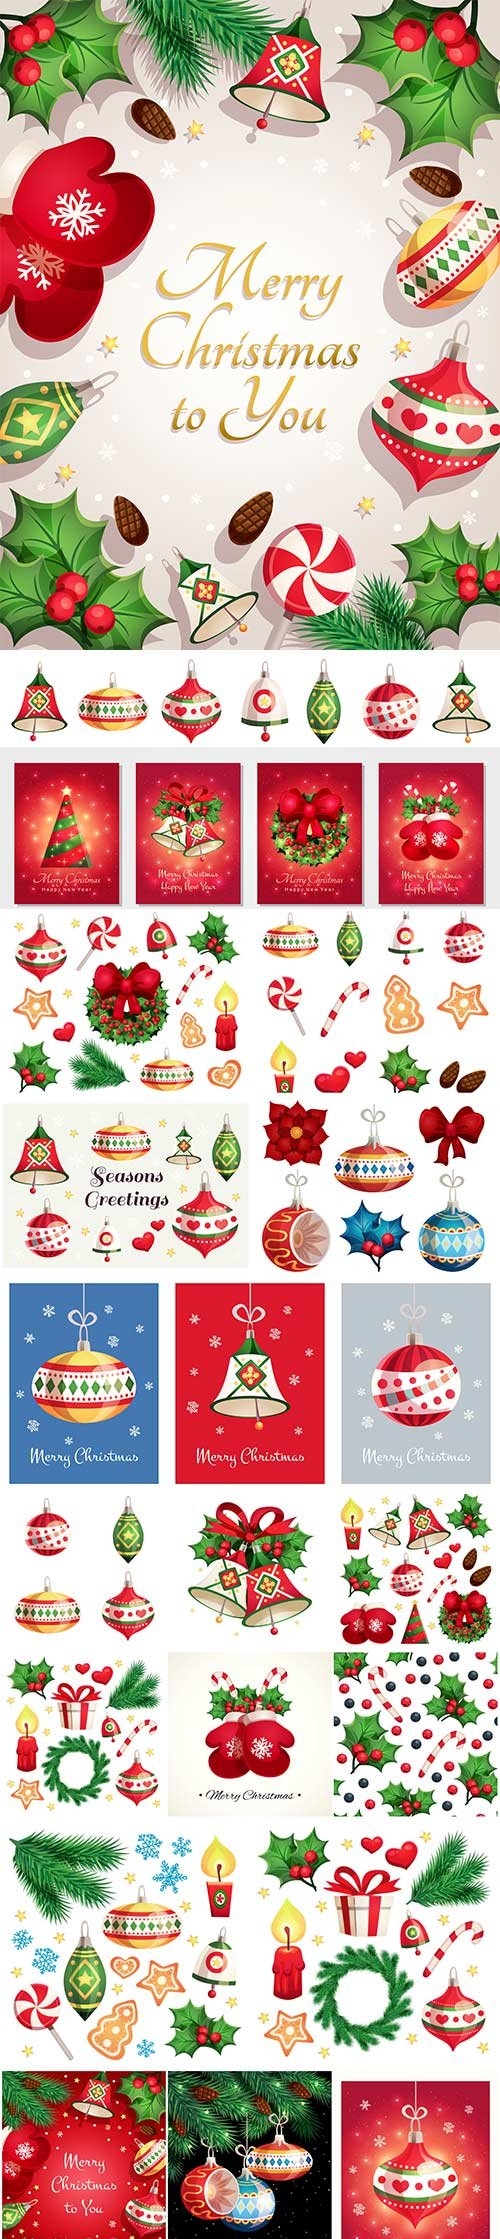 Merry christmas and happy new year card with decorative elements, christmas toys, bells, snowflakes and stars